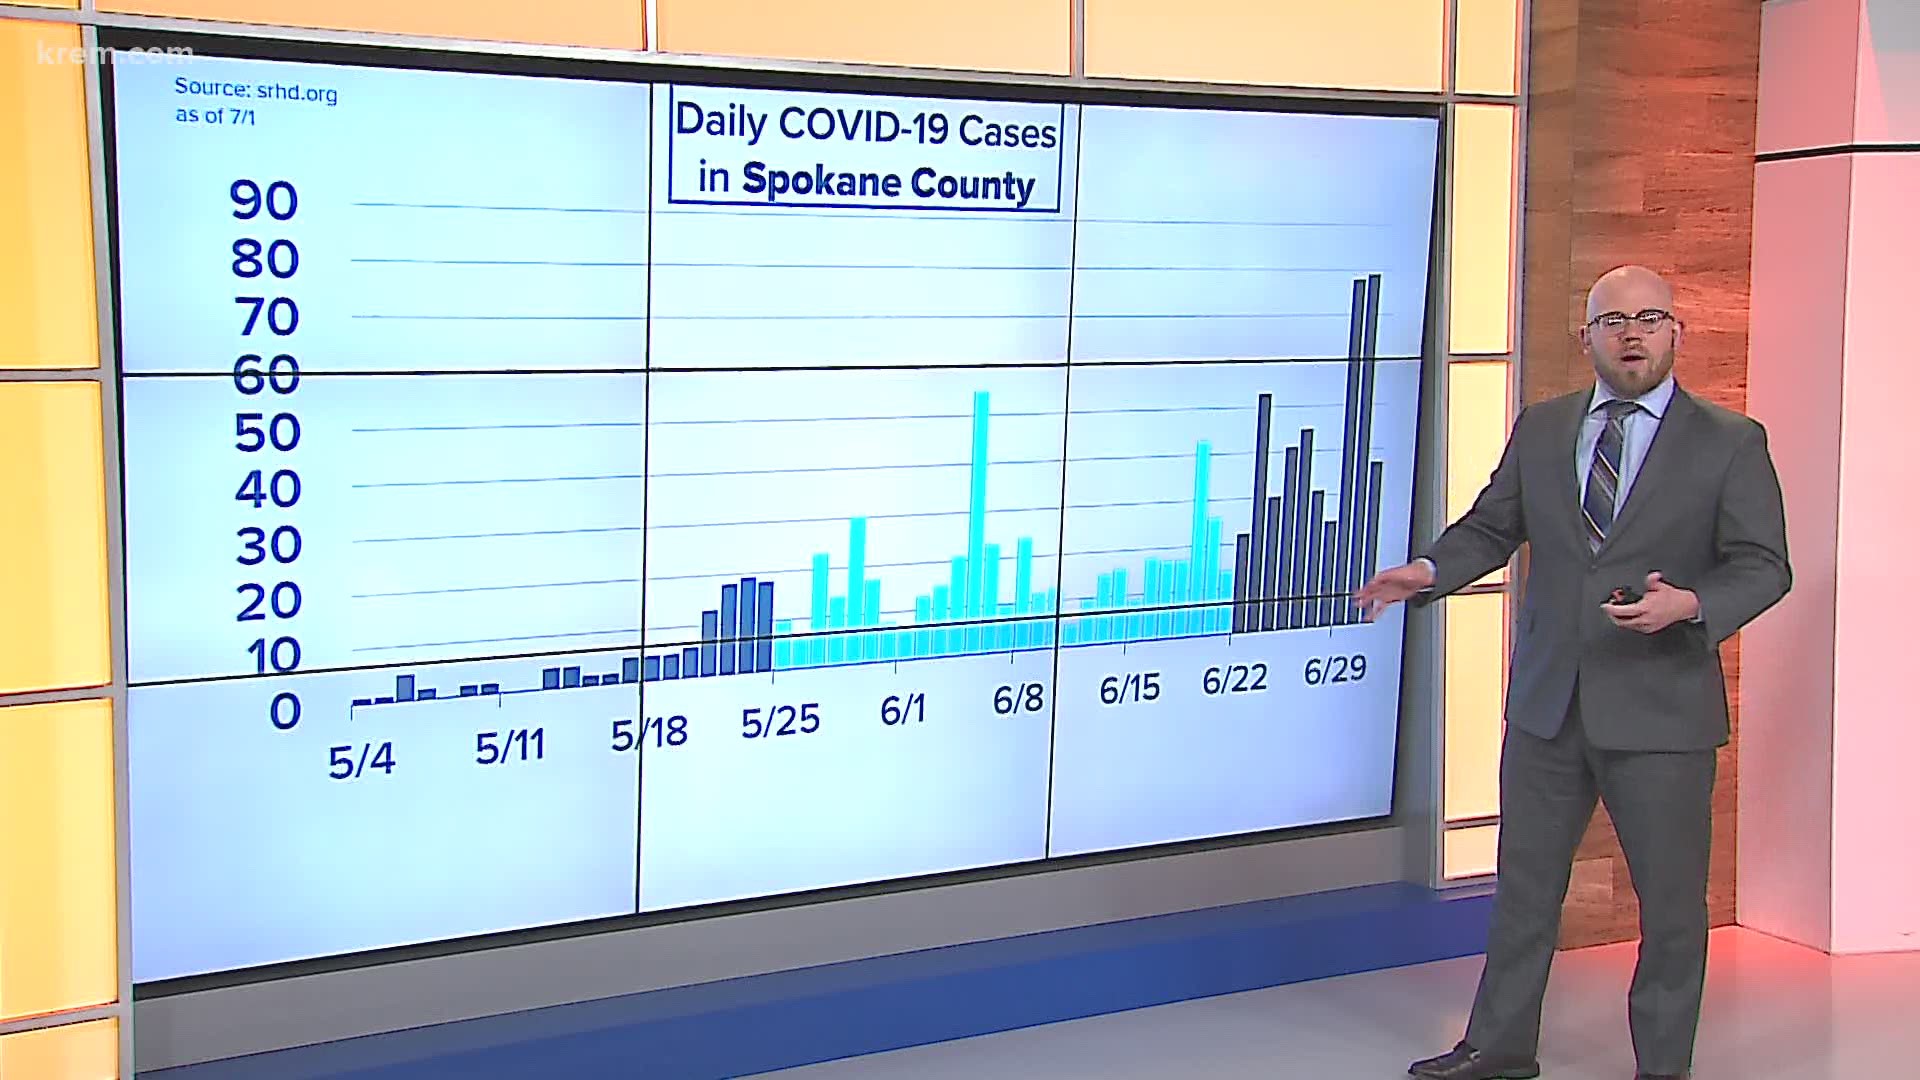 Based on trends following past holiday weekends, Spokane County could expect to see a rise in the number of daily coronavirus cases reported after July 4.